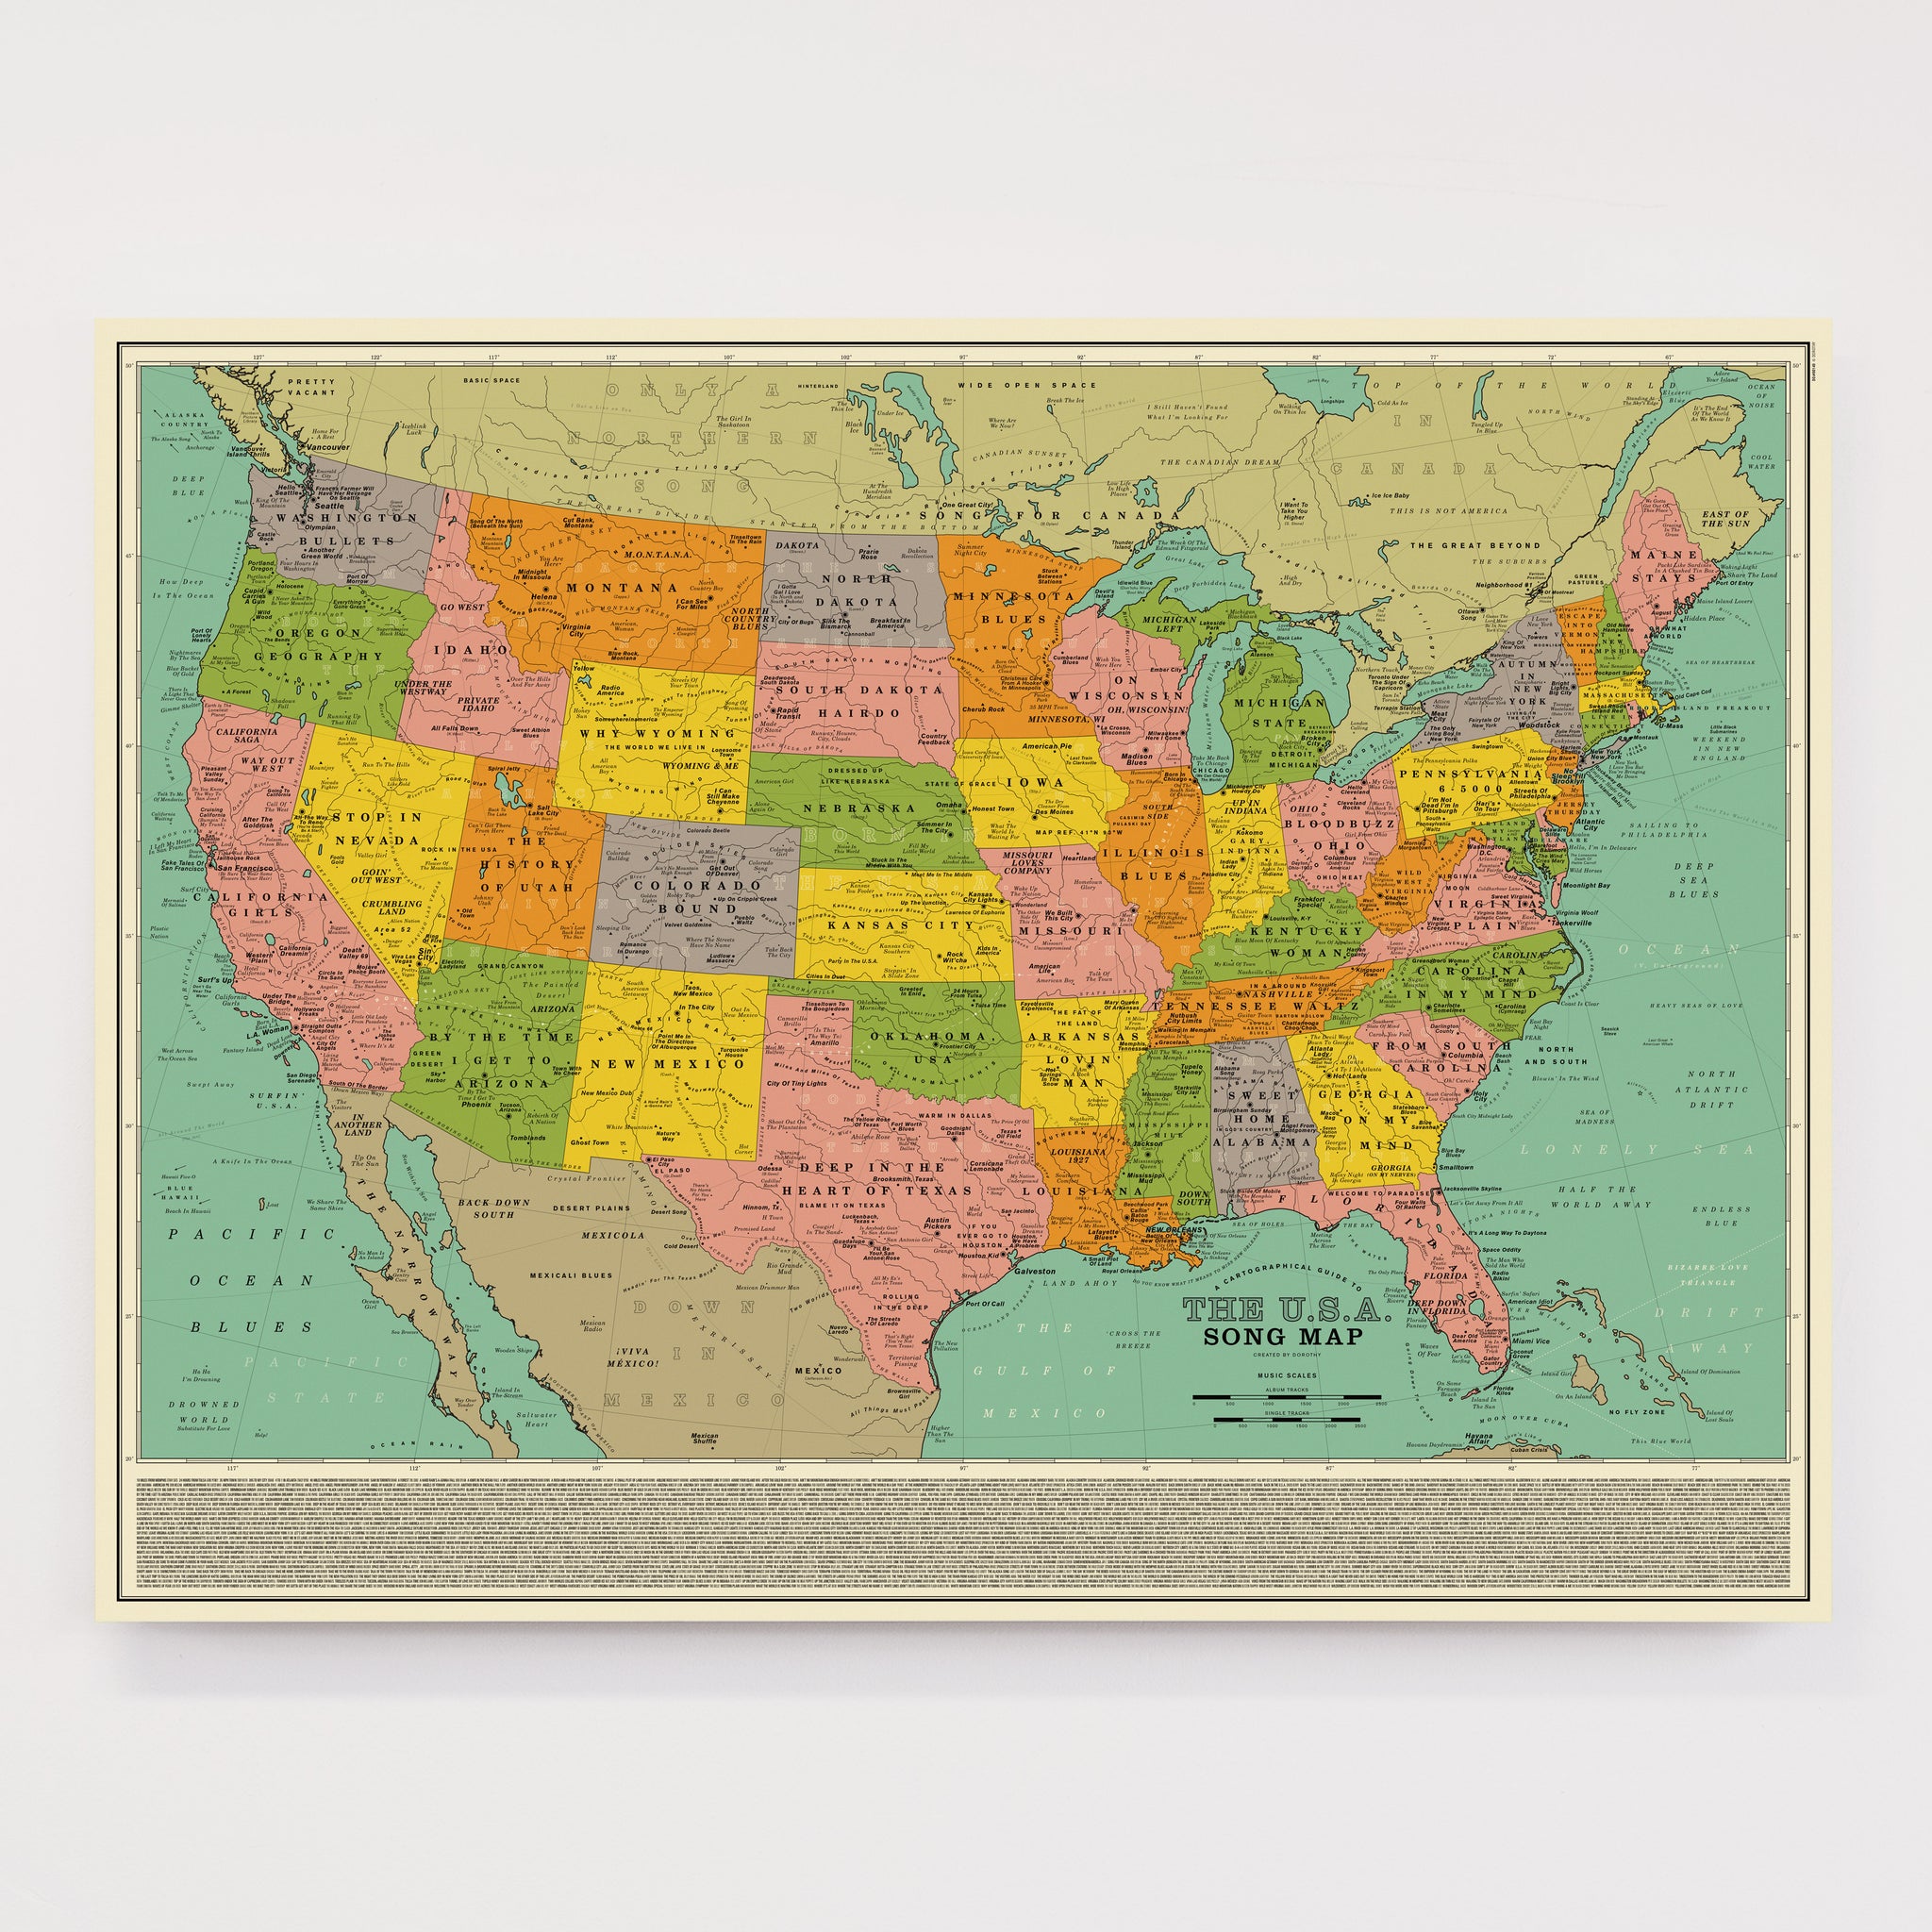 Map Of The United States Map Of The United States U.S.A. Song Map   Open Edition – Dorothy